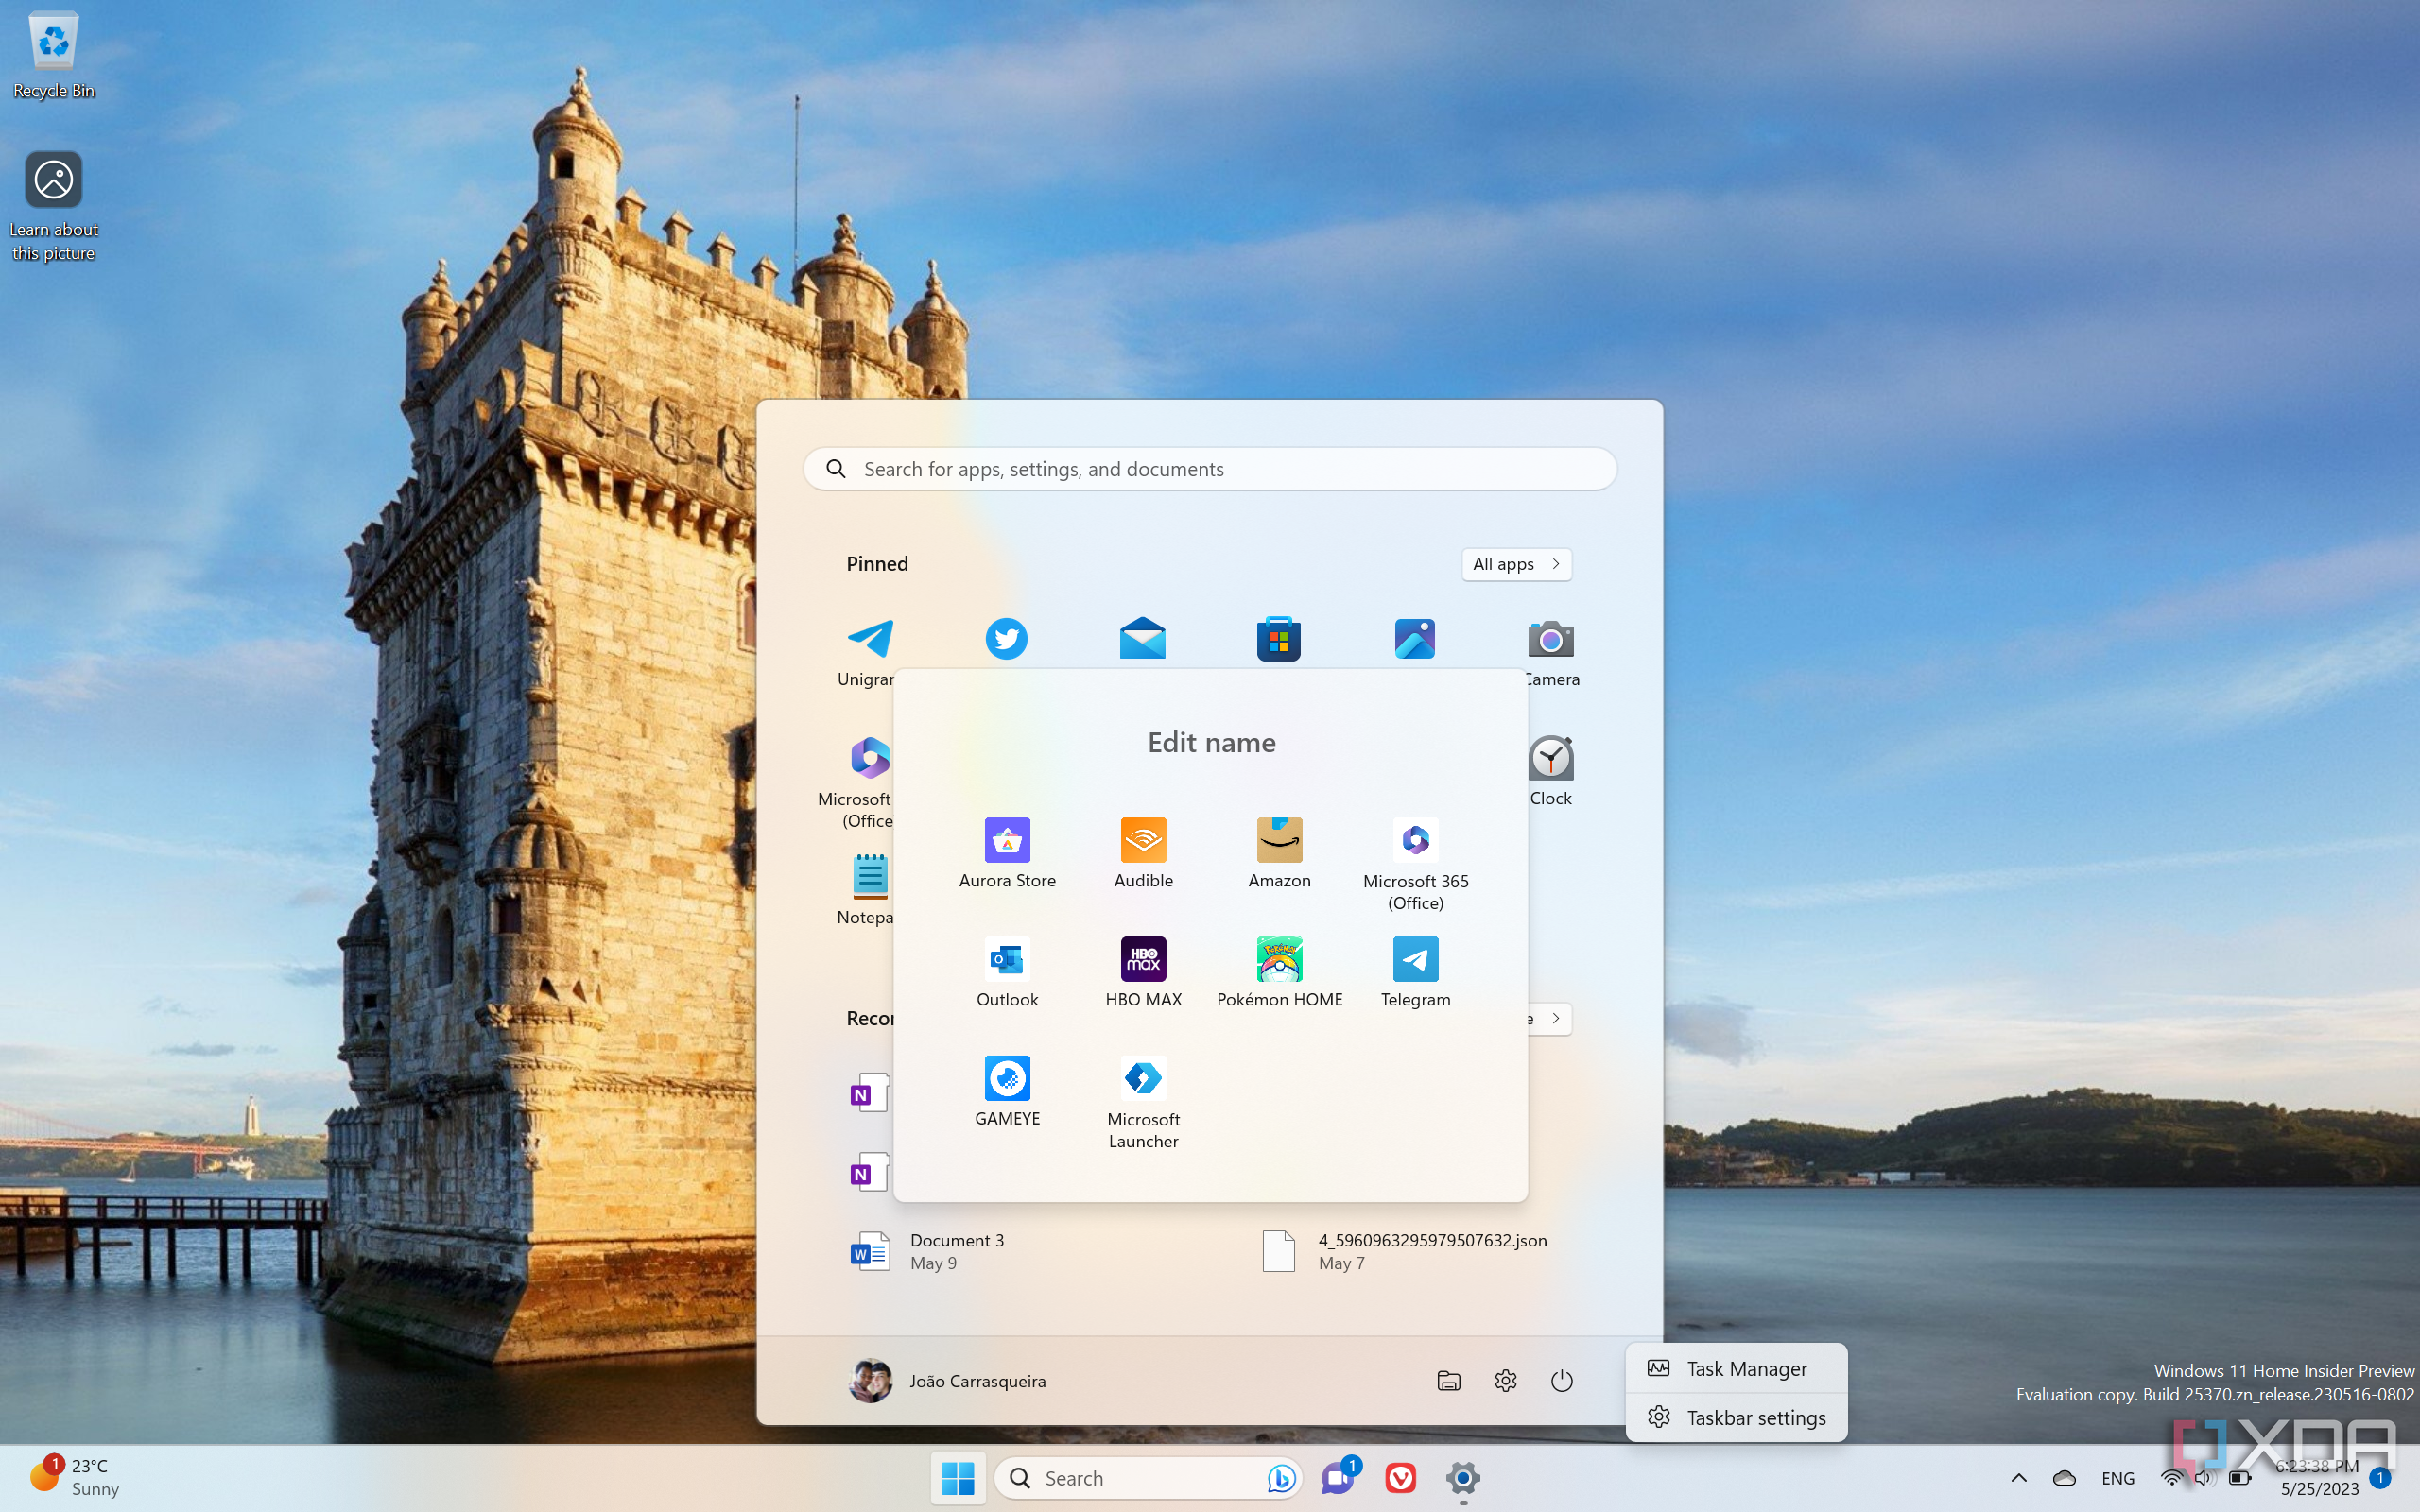 6 Windows 11 features that were brought back from previous versions